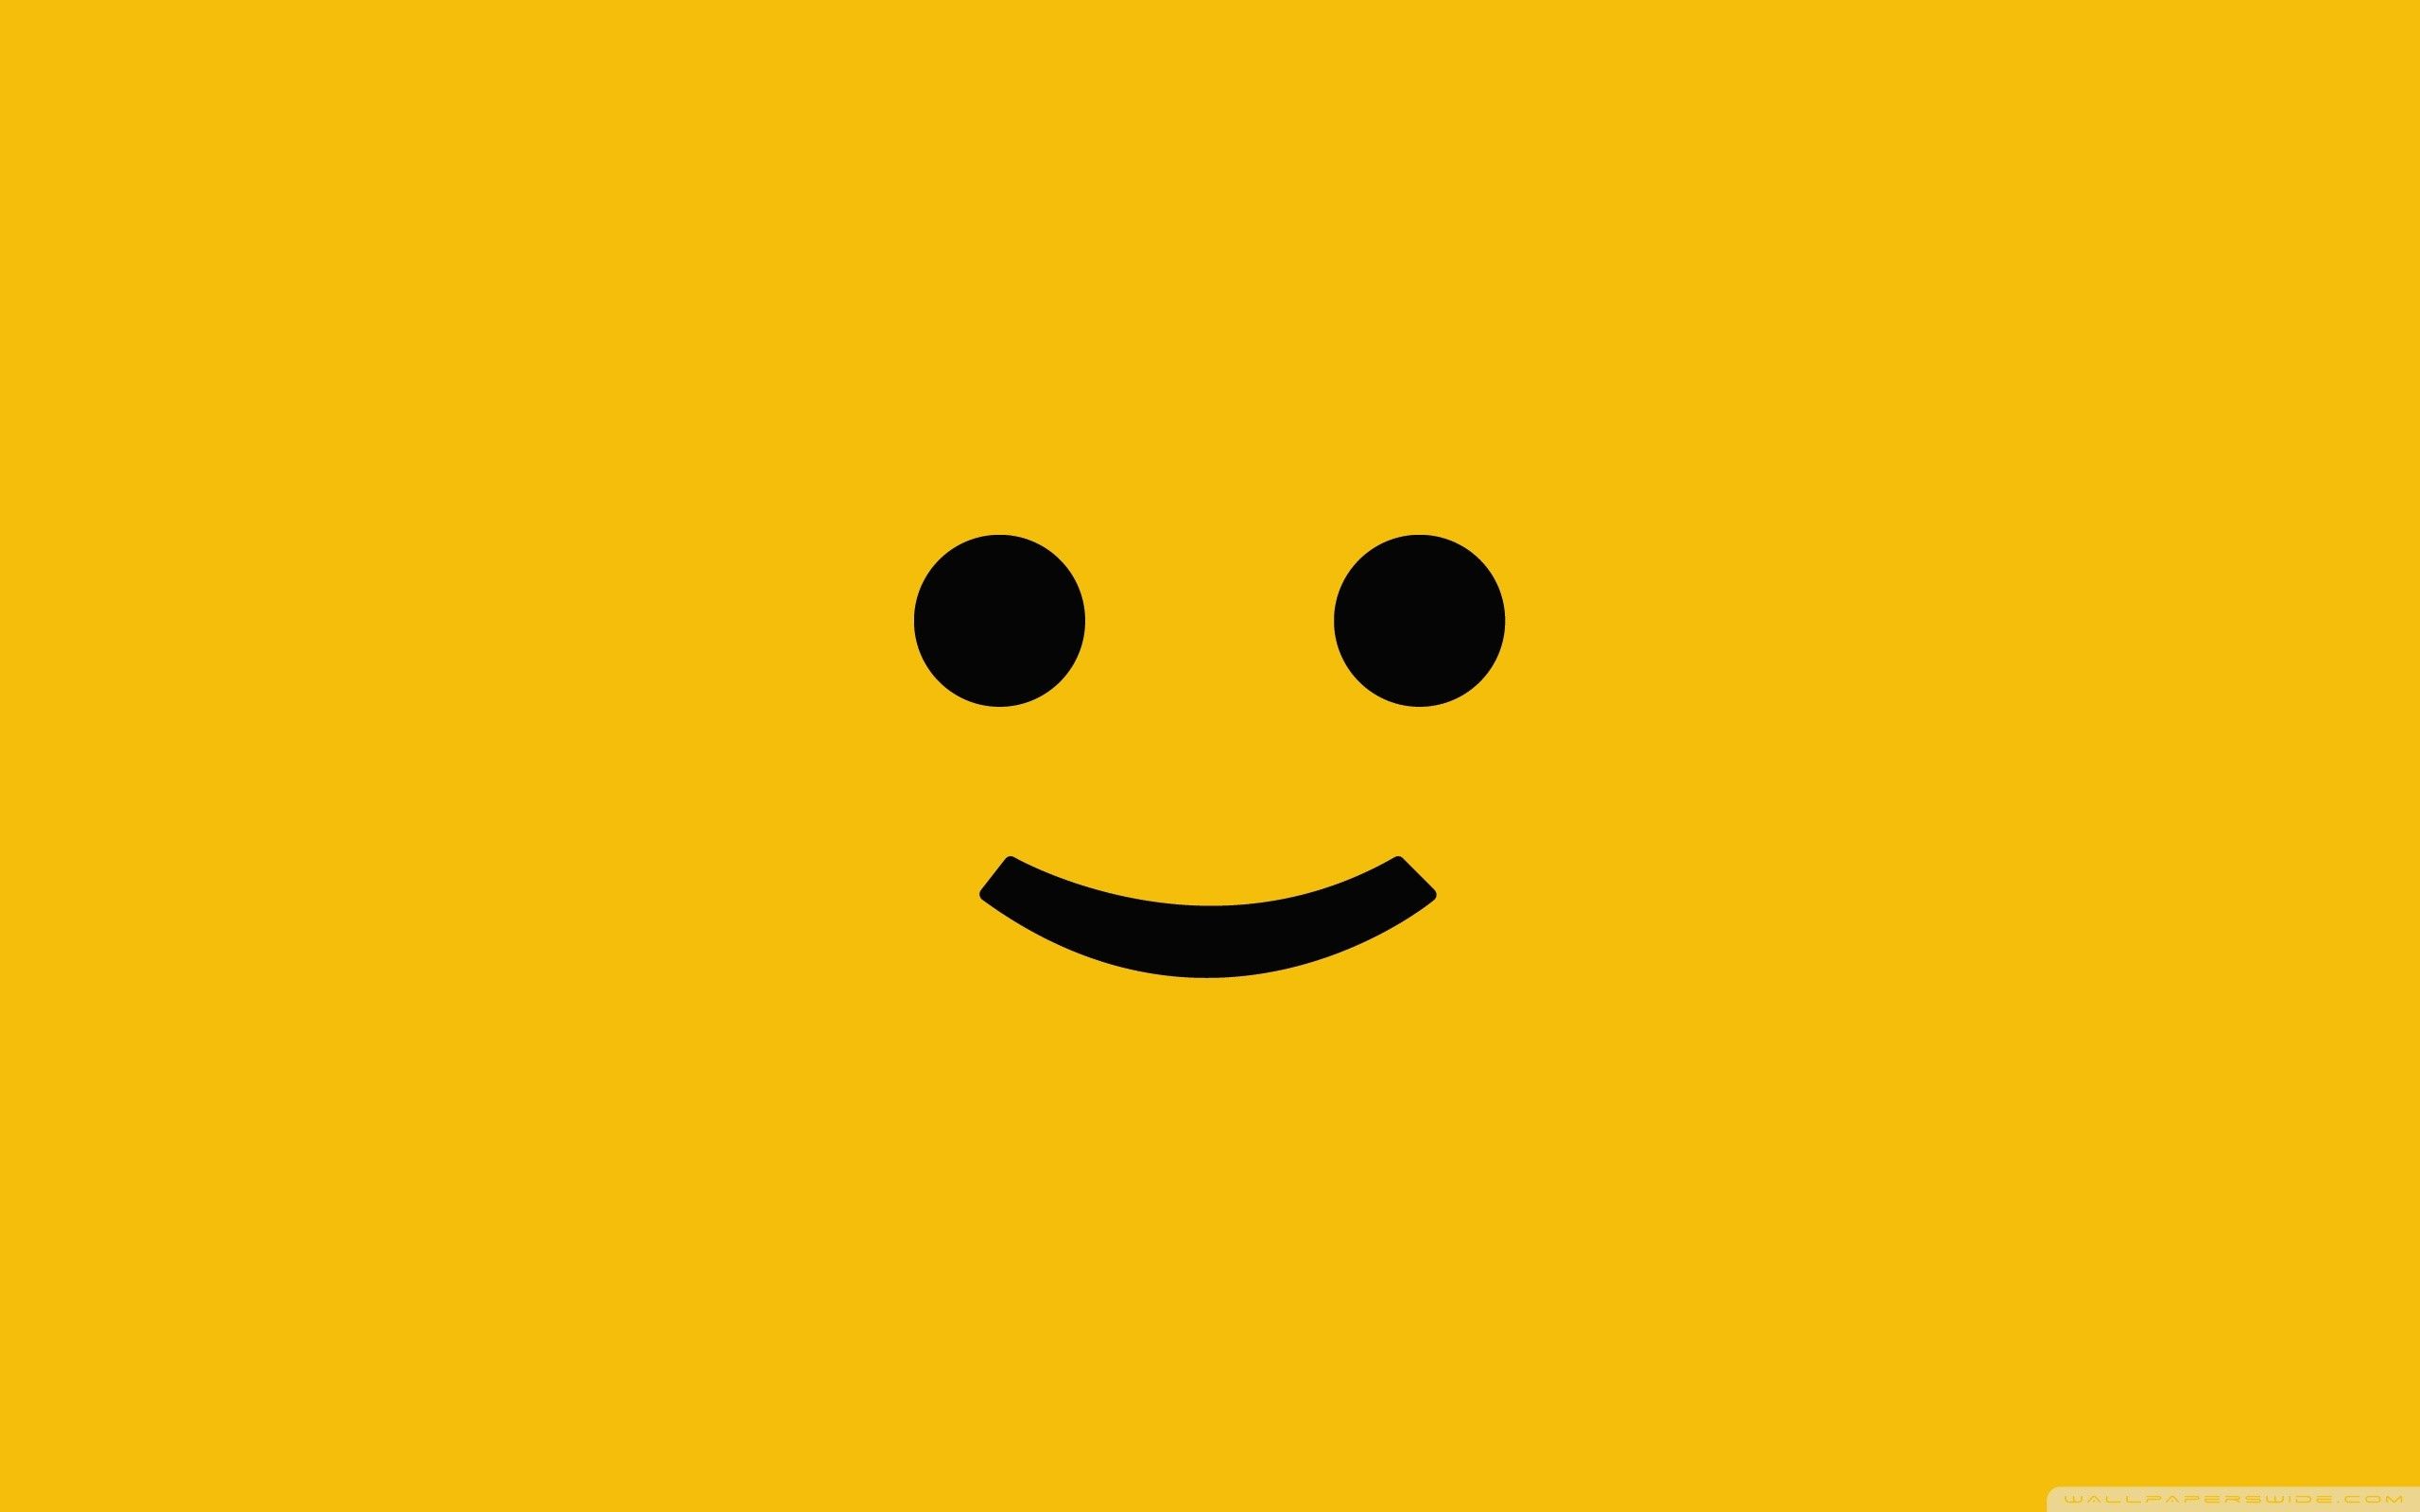 Smiley face wallpapers